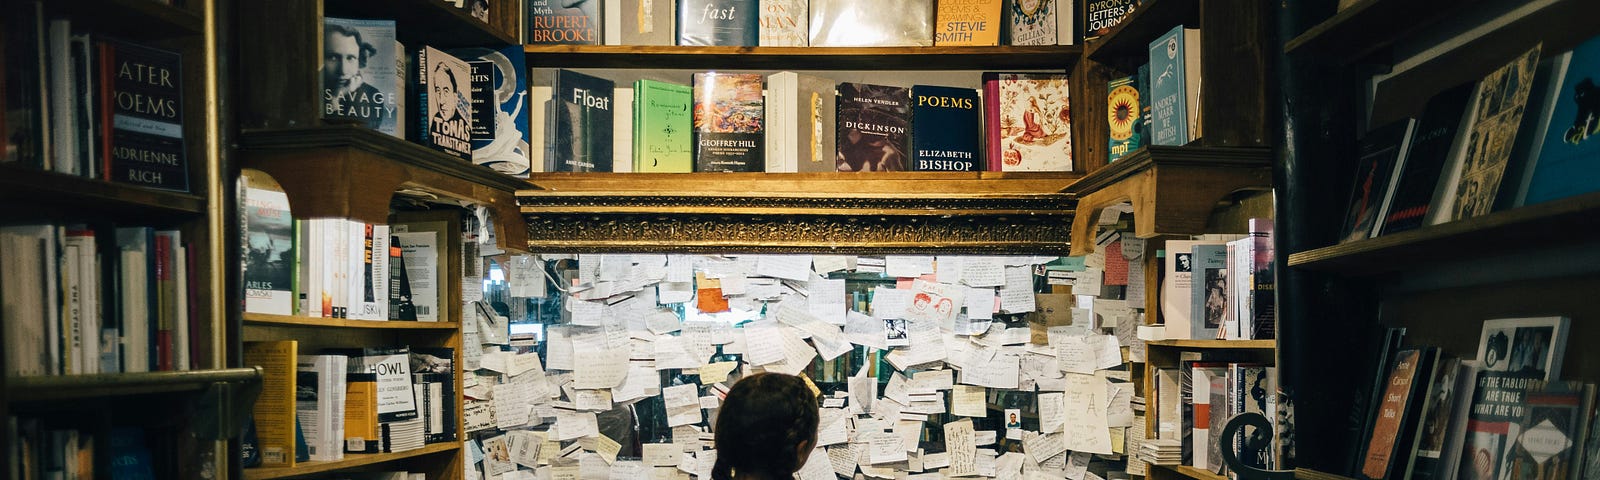 A young woman with braids stands in front of a large and very busy notice board at the back of the poetry section in a lovely old bookstore.